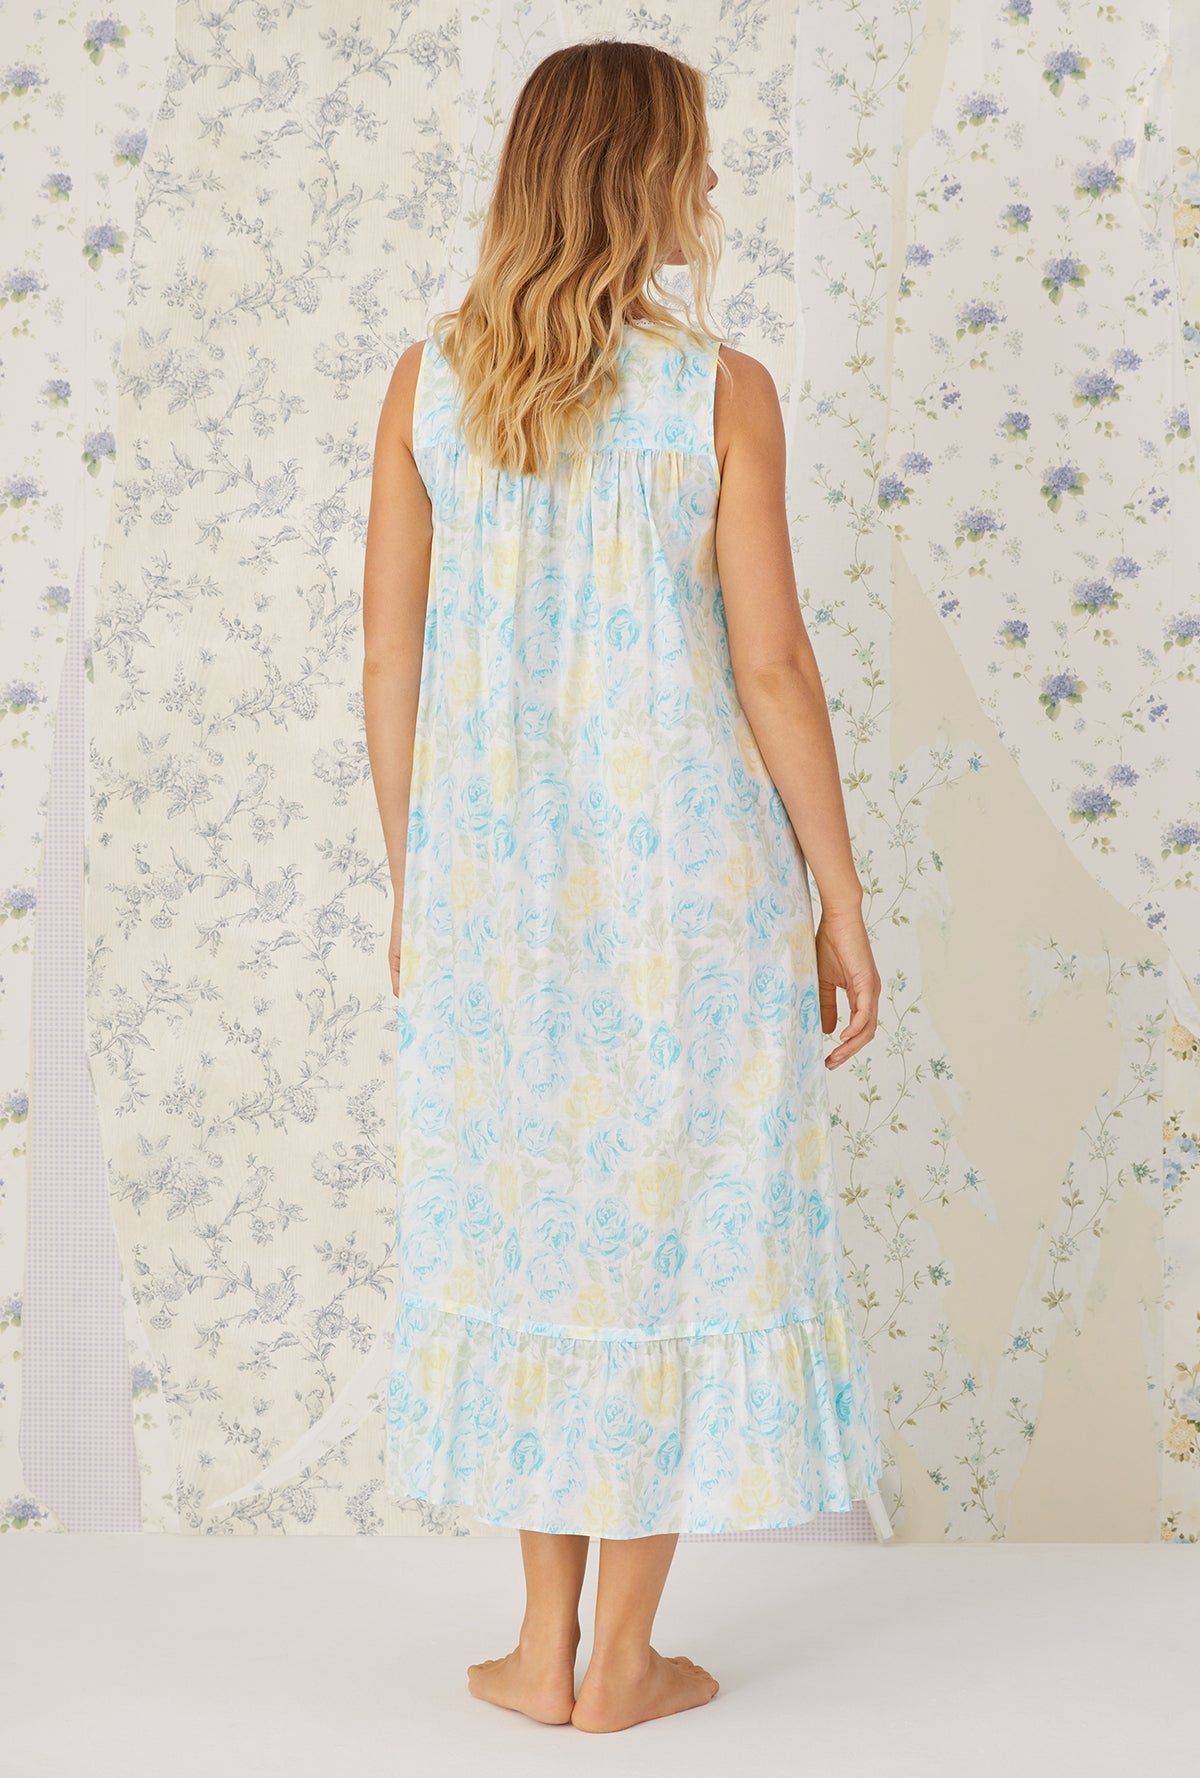 A lady wearing aqua sleeveless cotton lawn nightgown with floral pattern.